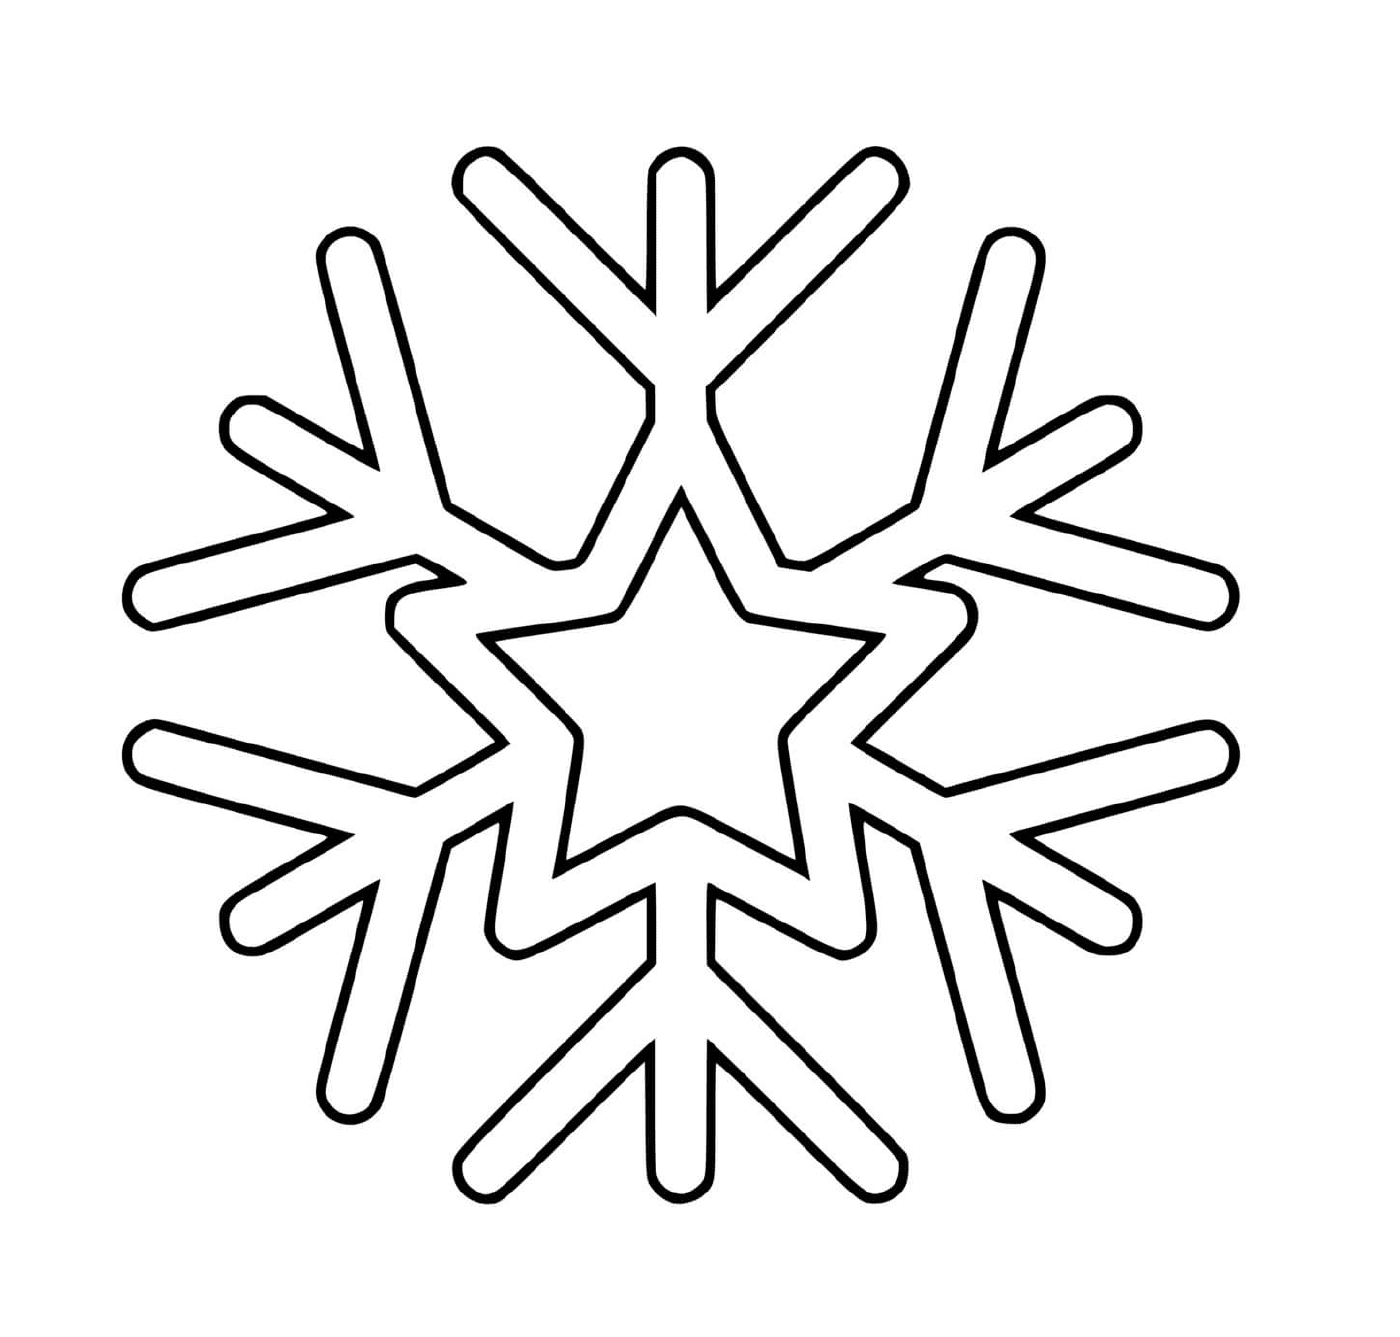  A snowflake with a star 